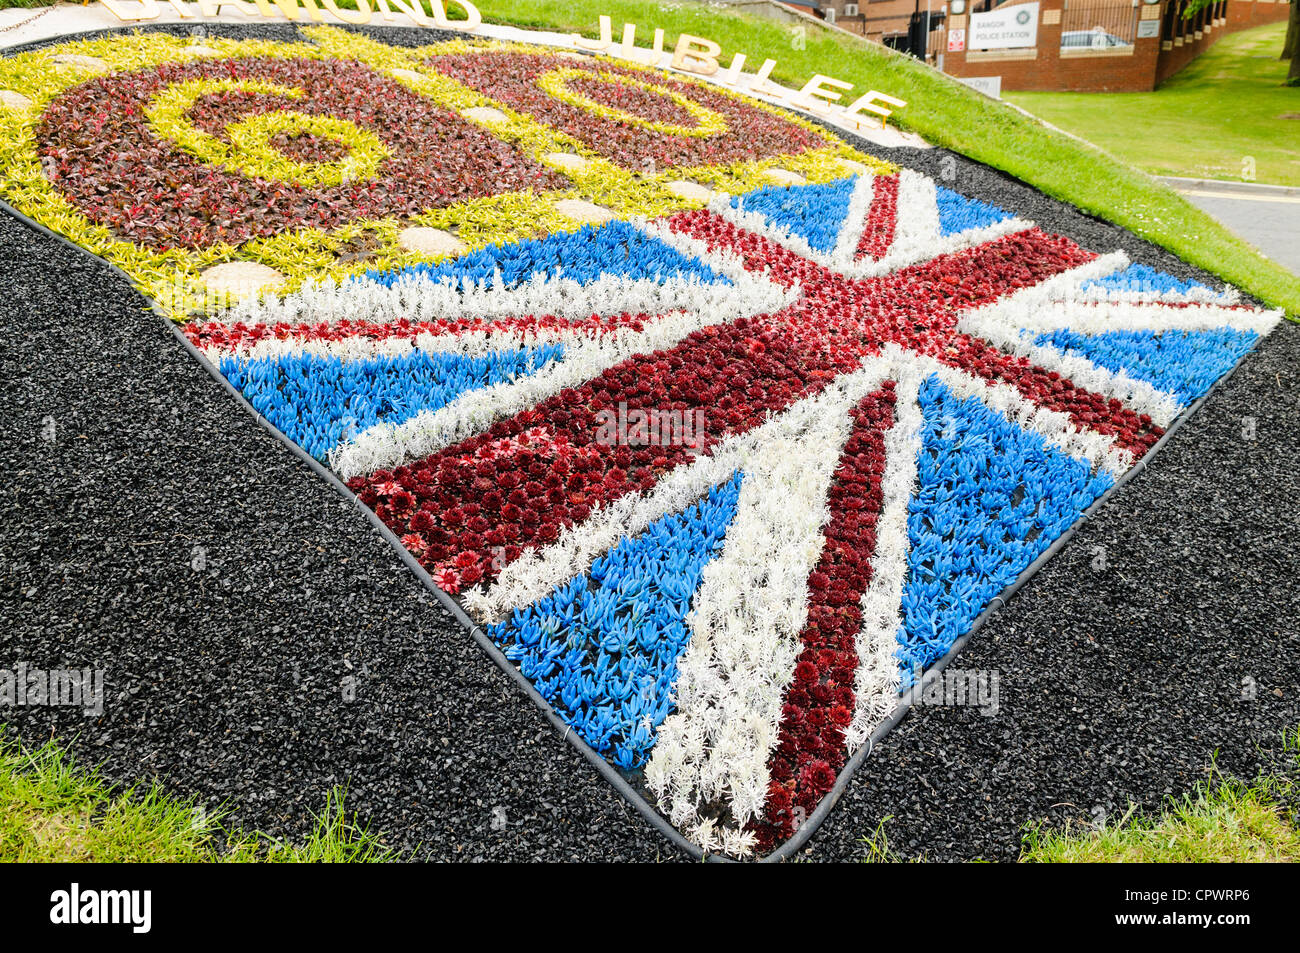 Union Jack flag made out of alpine plants to celebrate the Queen's Diamond Jubilee Stock Photo